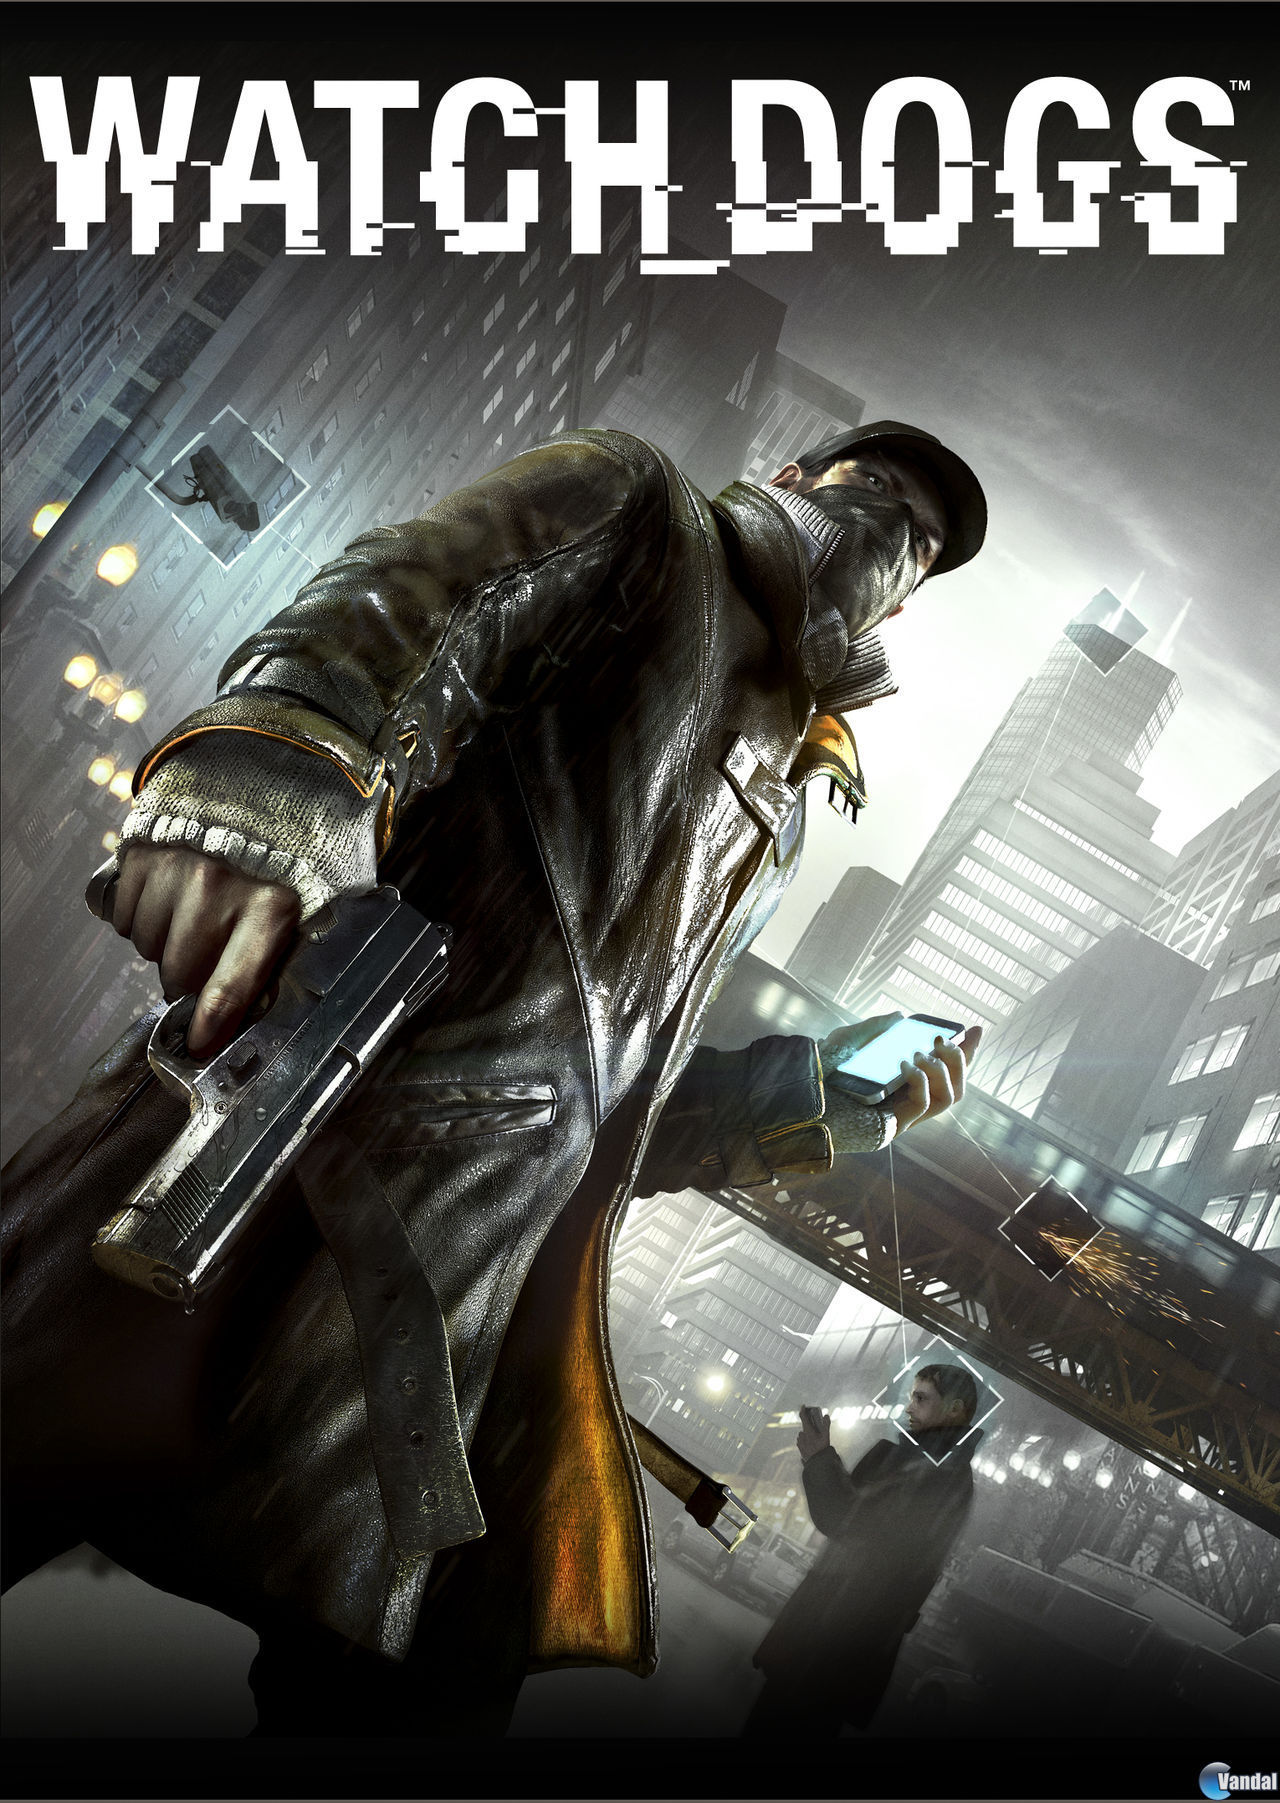 watch dogs, games